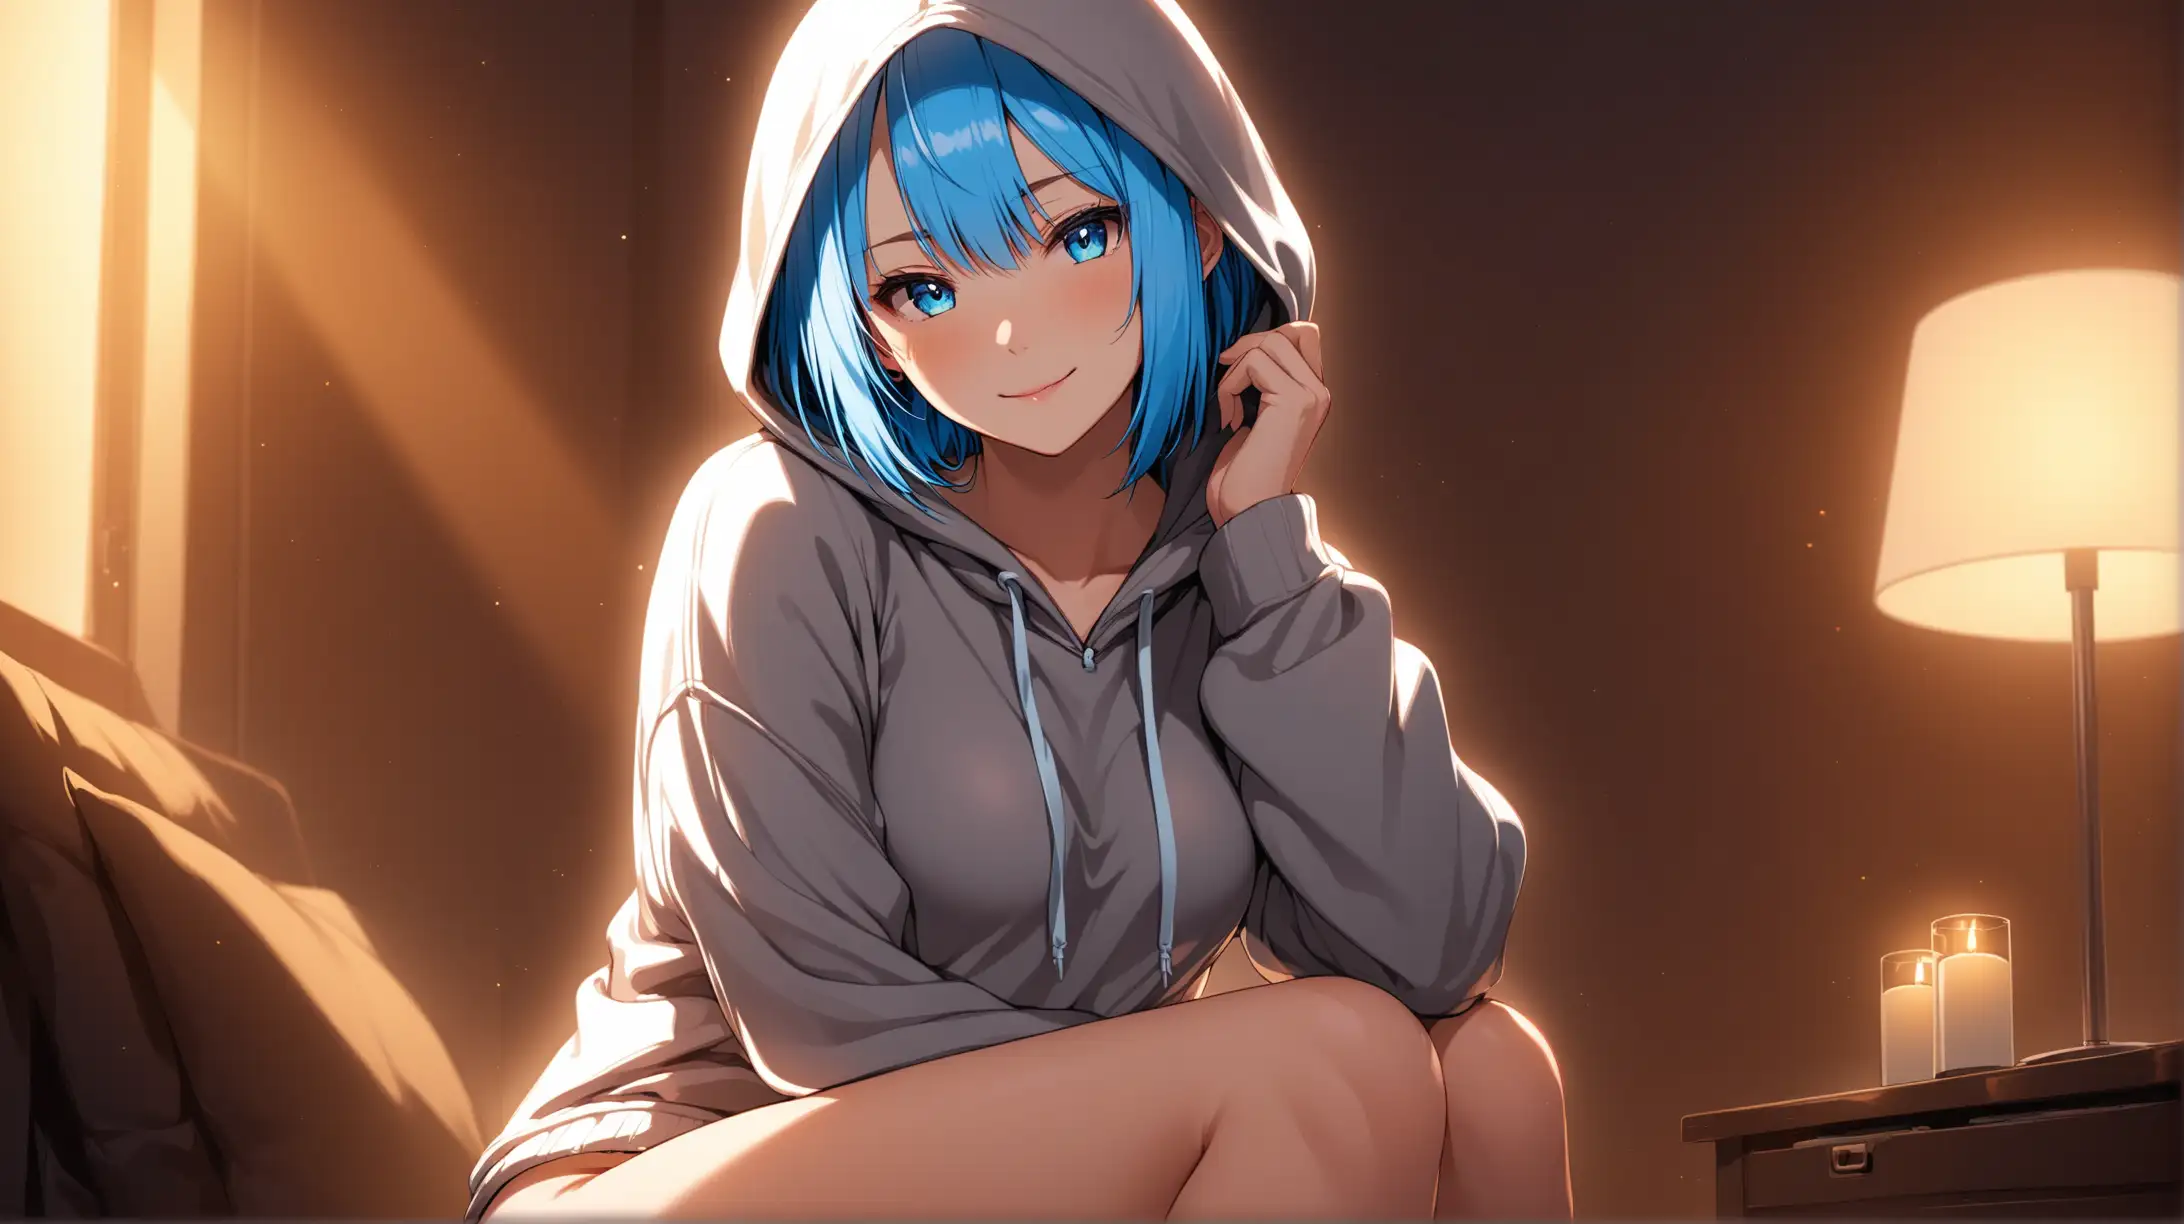 Draw the character Rem, high quality, ambient lighting, long shot, indoors, sitting, seductive pose, wearing a hoodie, revealing, smiling at the viewer